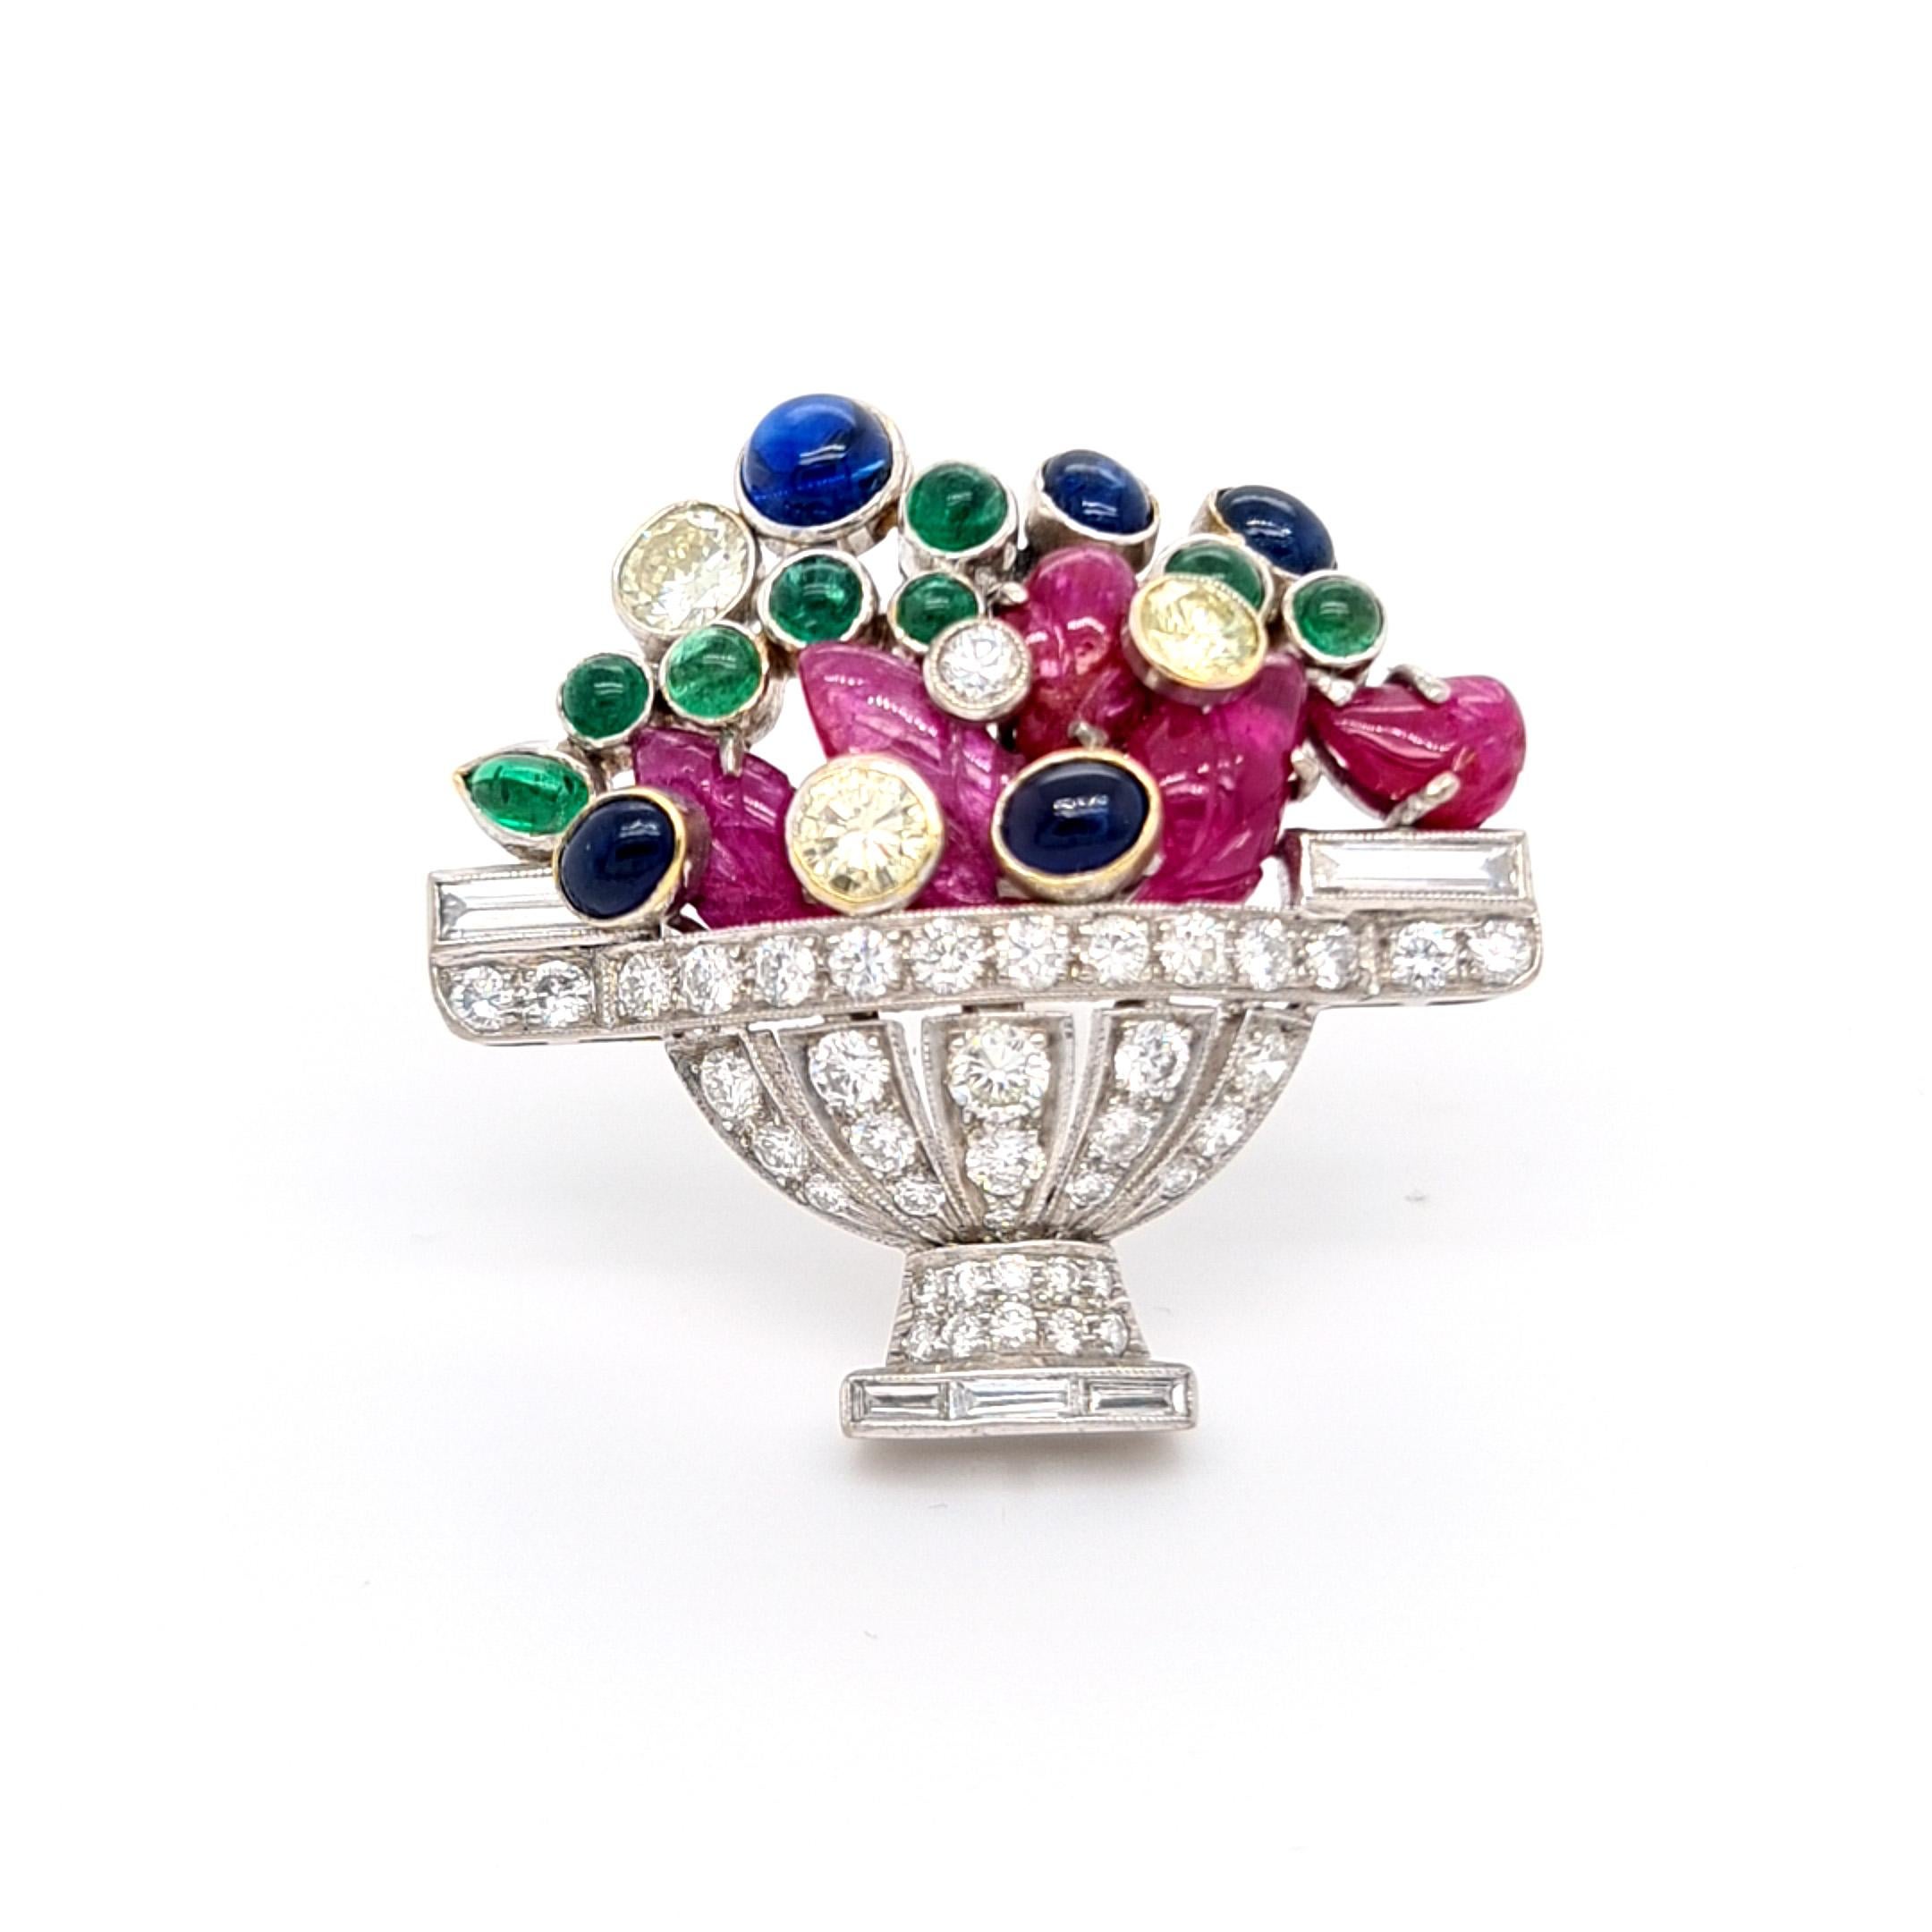 Retro Vintage Diamond Ruby Sapphire and Emerald Jardiniére Brooch, Circa 1960 For Sale